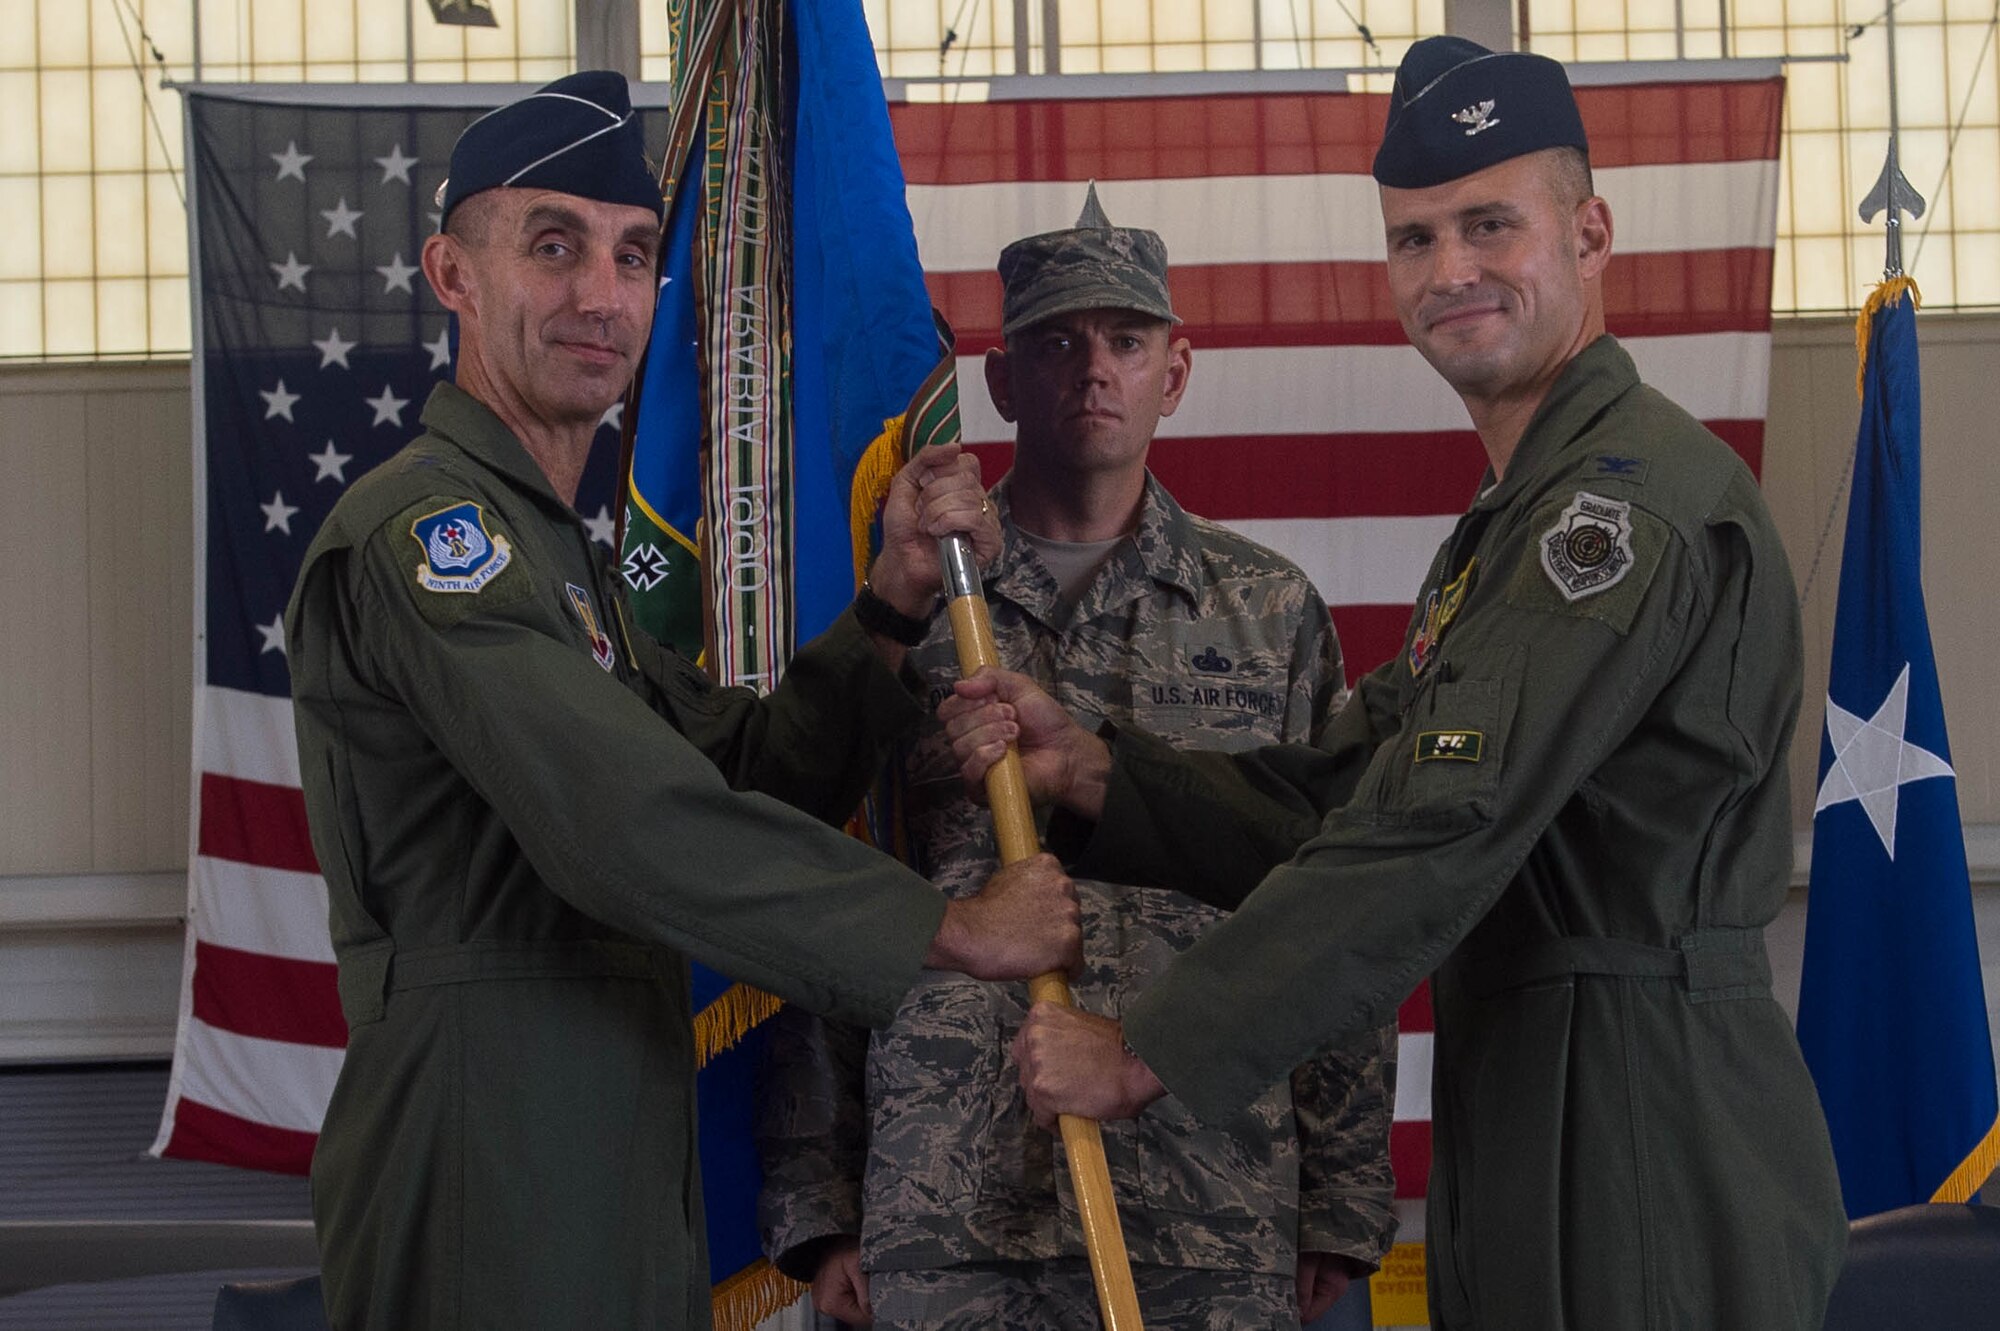 U.S. Air Force Col. Peter Fesler (right), former 1st Fighter Wing commander, relinquishes command of the 1st FW during a change of command ceremony at Joint Base Langley-Eustis, Va., June 23, 2017. The 1st FW is comprised of six squadrons of more than 1,300 members who employ and sustain worldwide rapid deployment of more than 40 F-22 Raptor aircraft. (U.S. Air Force photo by Senior Airman Derek Seifert)